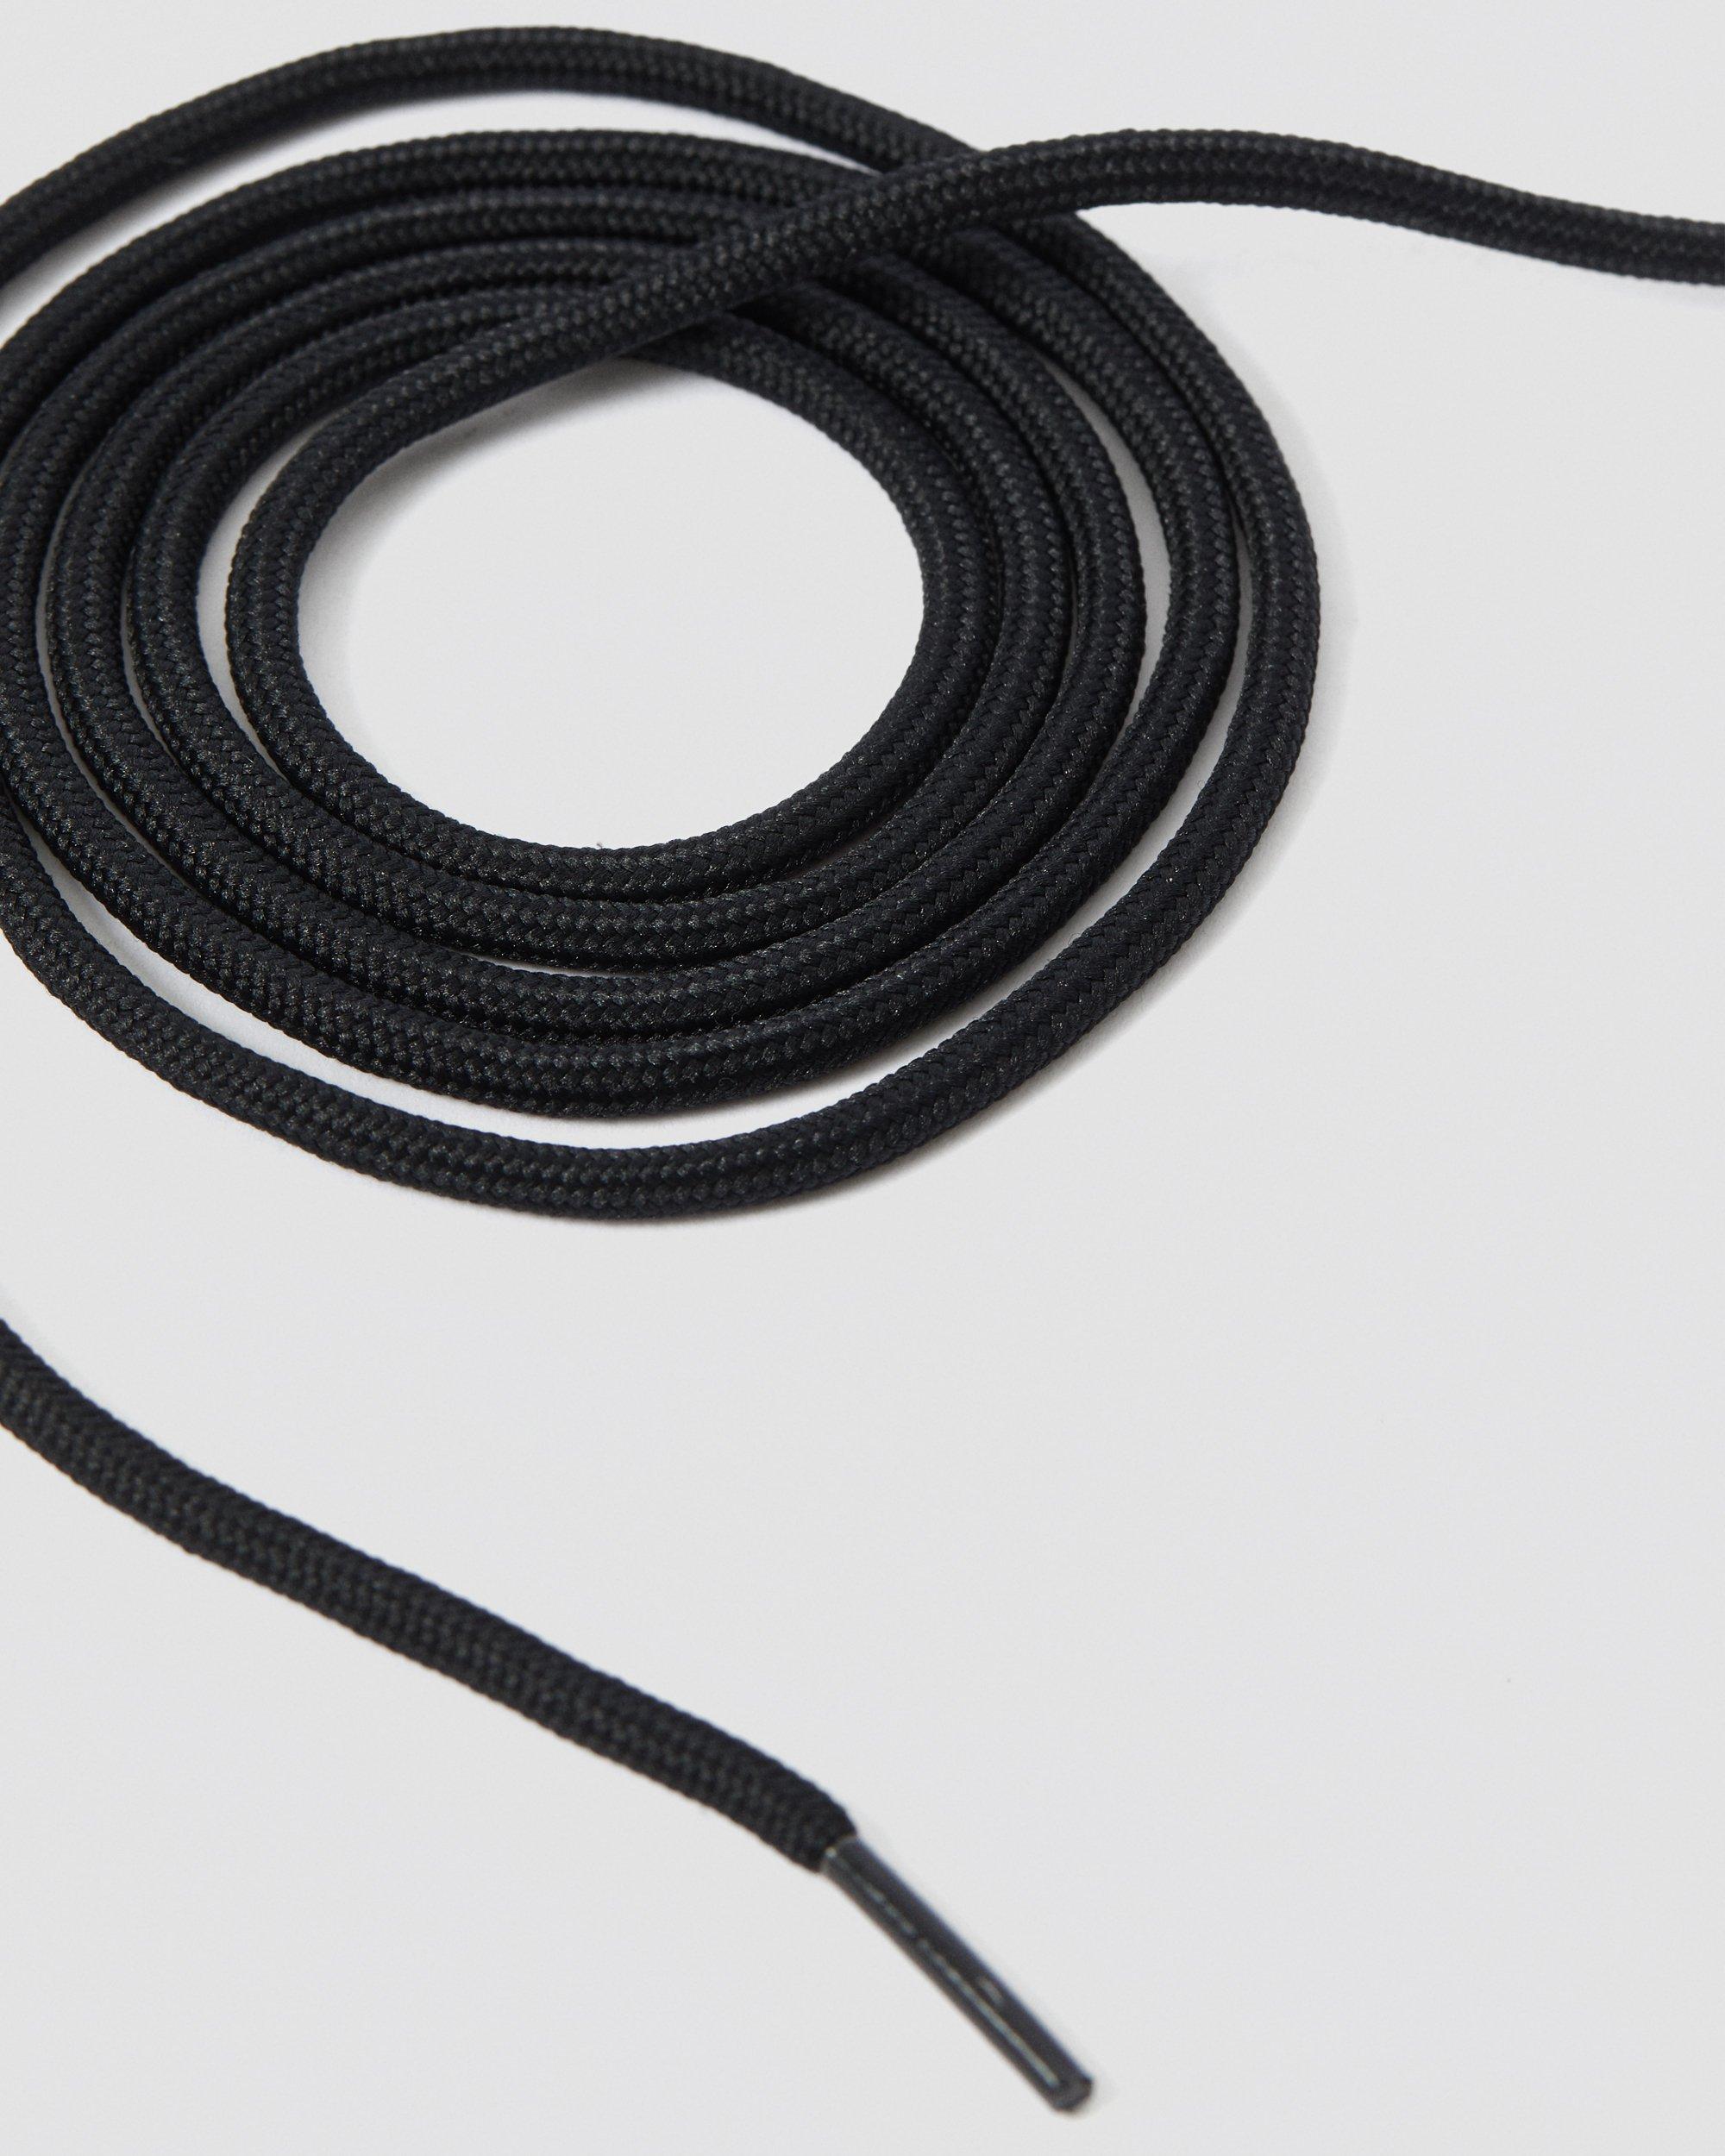 55 Inch Round Shoe Laces (8-10 Eye) in Black